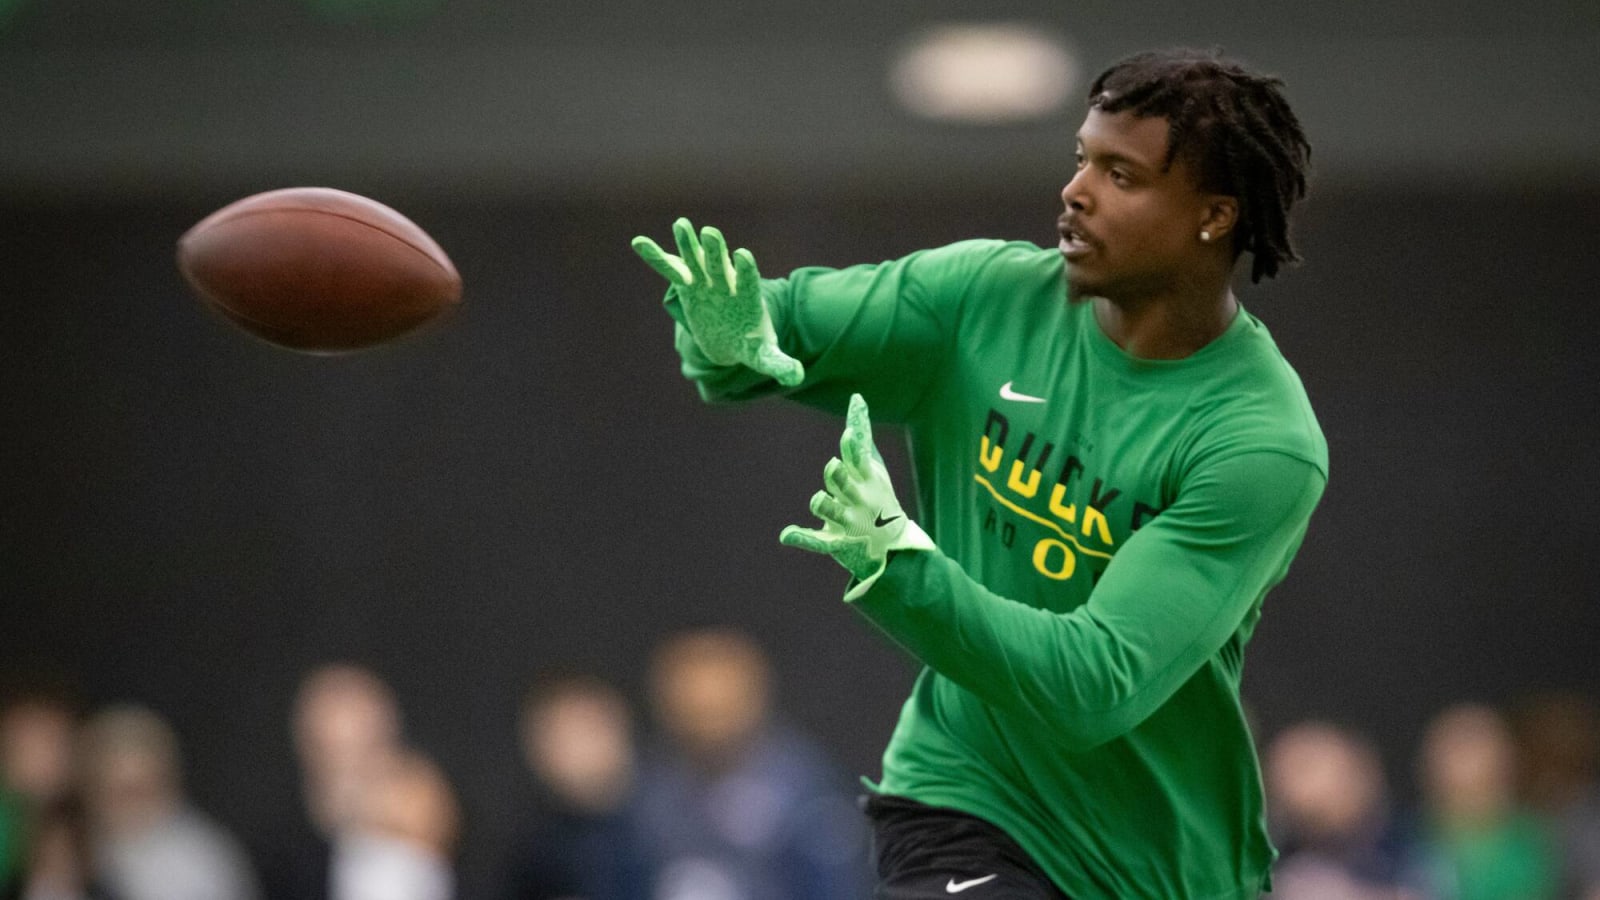 Khyree Jackson 2024 NFL Draft: Combine Results, Scouting Report For Oregon CB